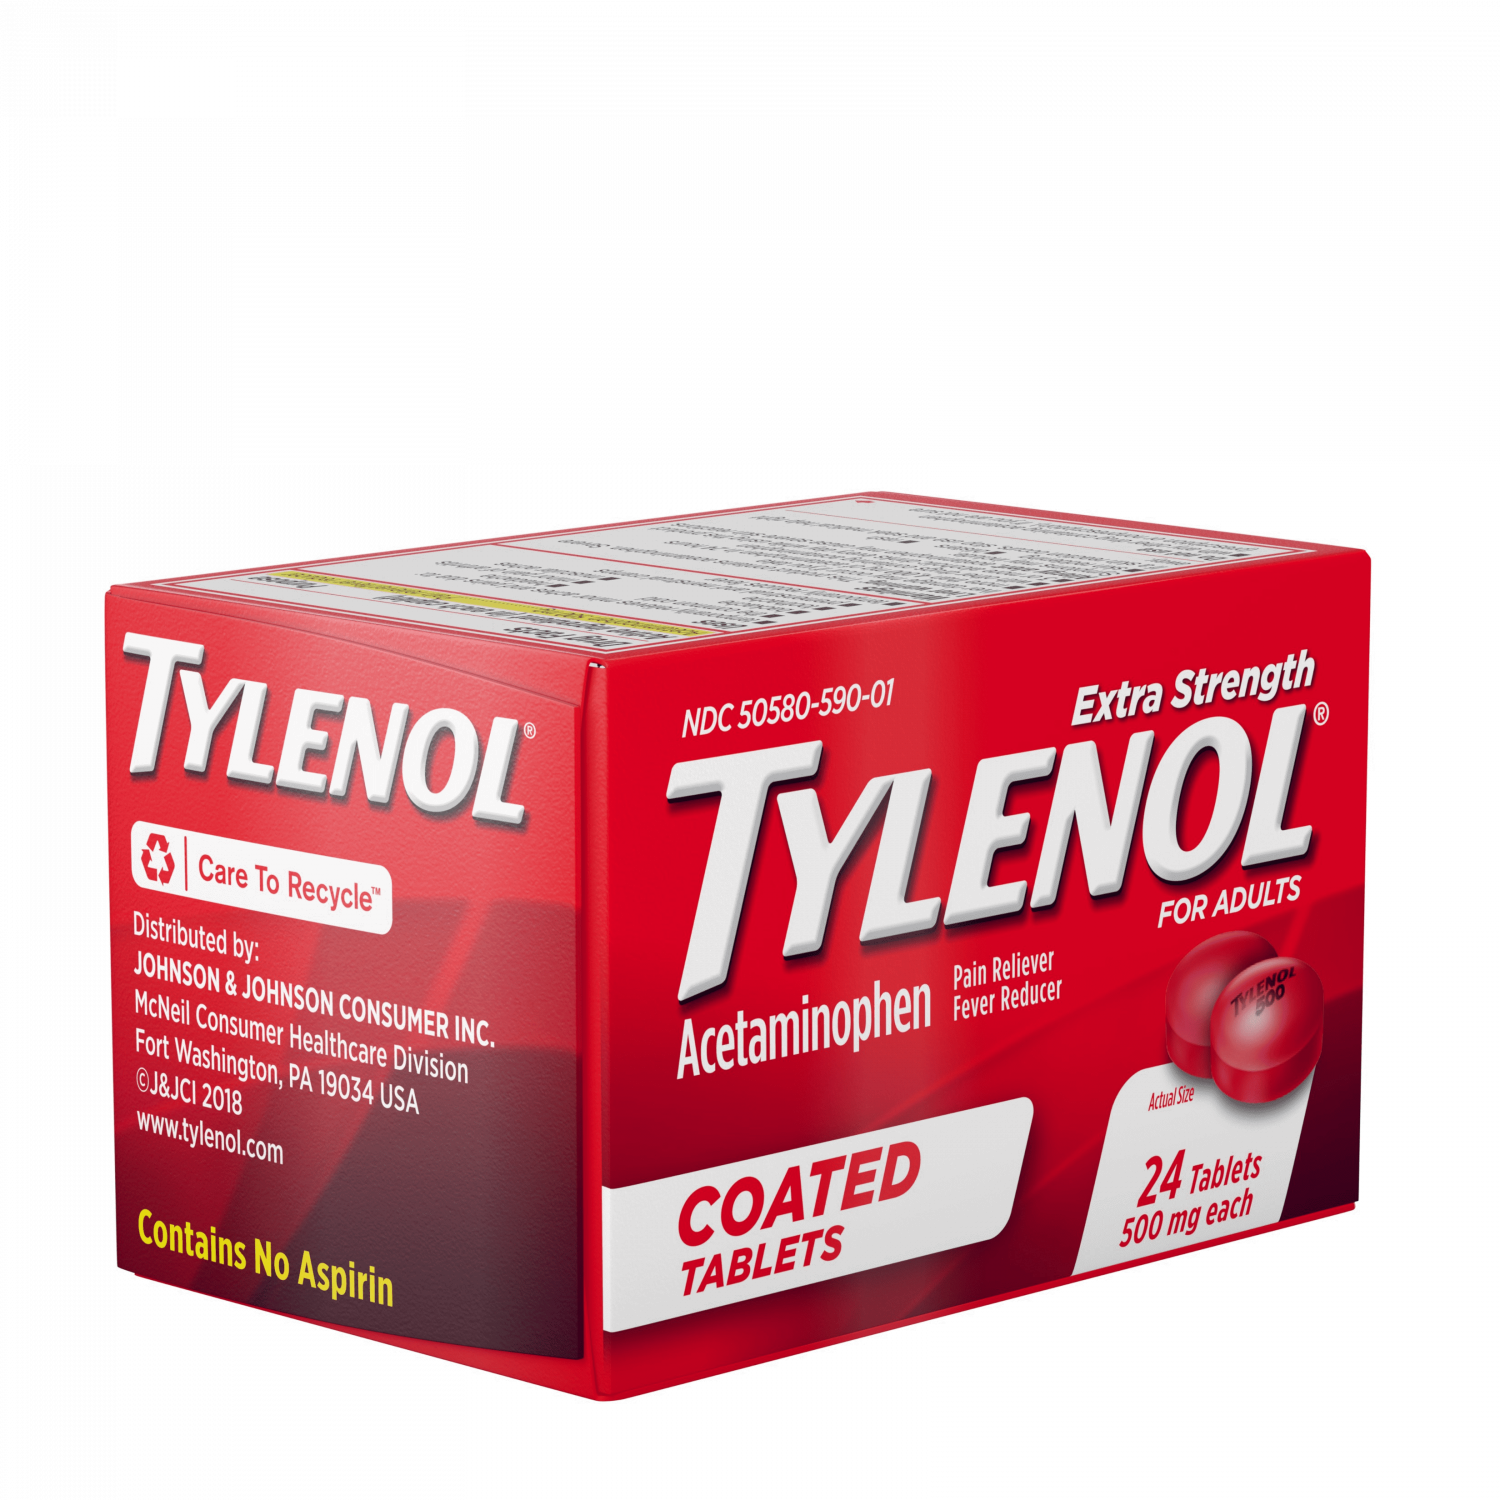 Tylenol Extra Strength Coated Tablets with Acetaminophen 500mg, Pain Reliever & Fever Reducer, 24 Count